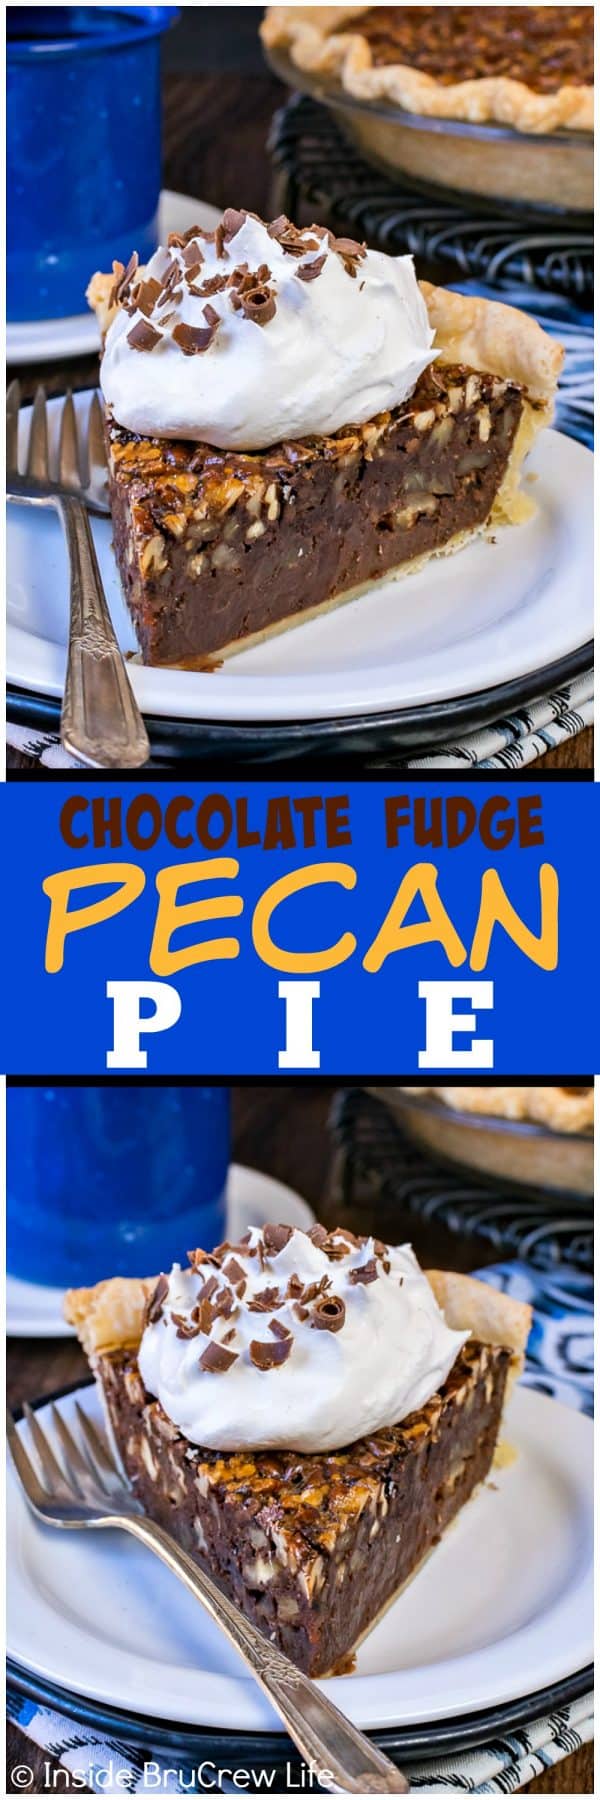 Chocolate Fudge Pecan Pie - layers of gooey fudge and toasted nuts make this an amazing dessert. Great recipe to make ahead of time for Thanksgiving day dinner!